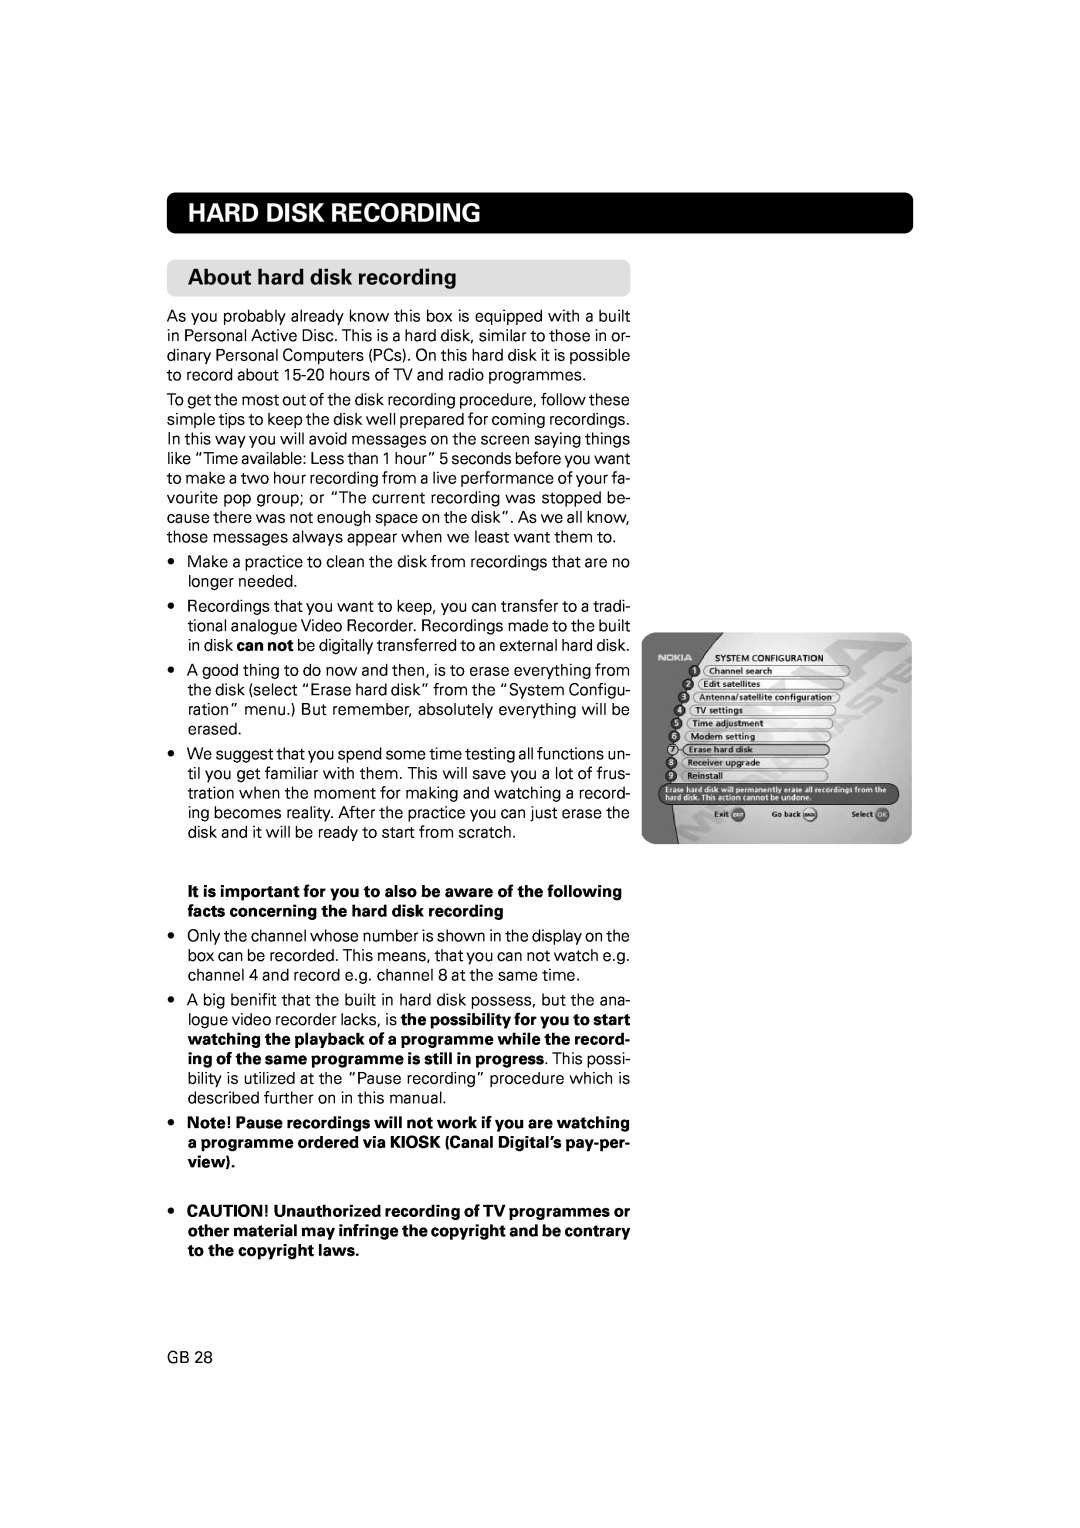 JA Audio 9902S manual Hard Disk Recording, About hard disk recording 